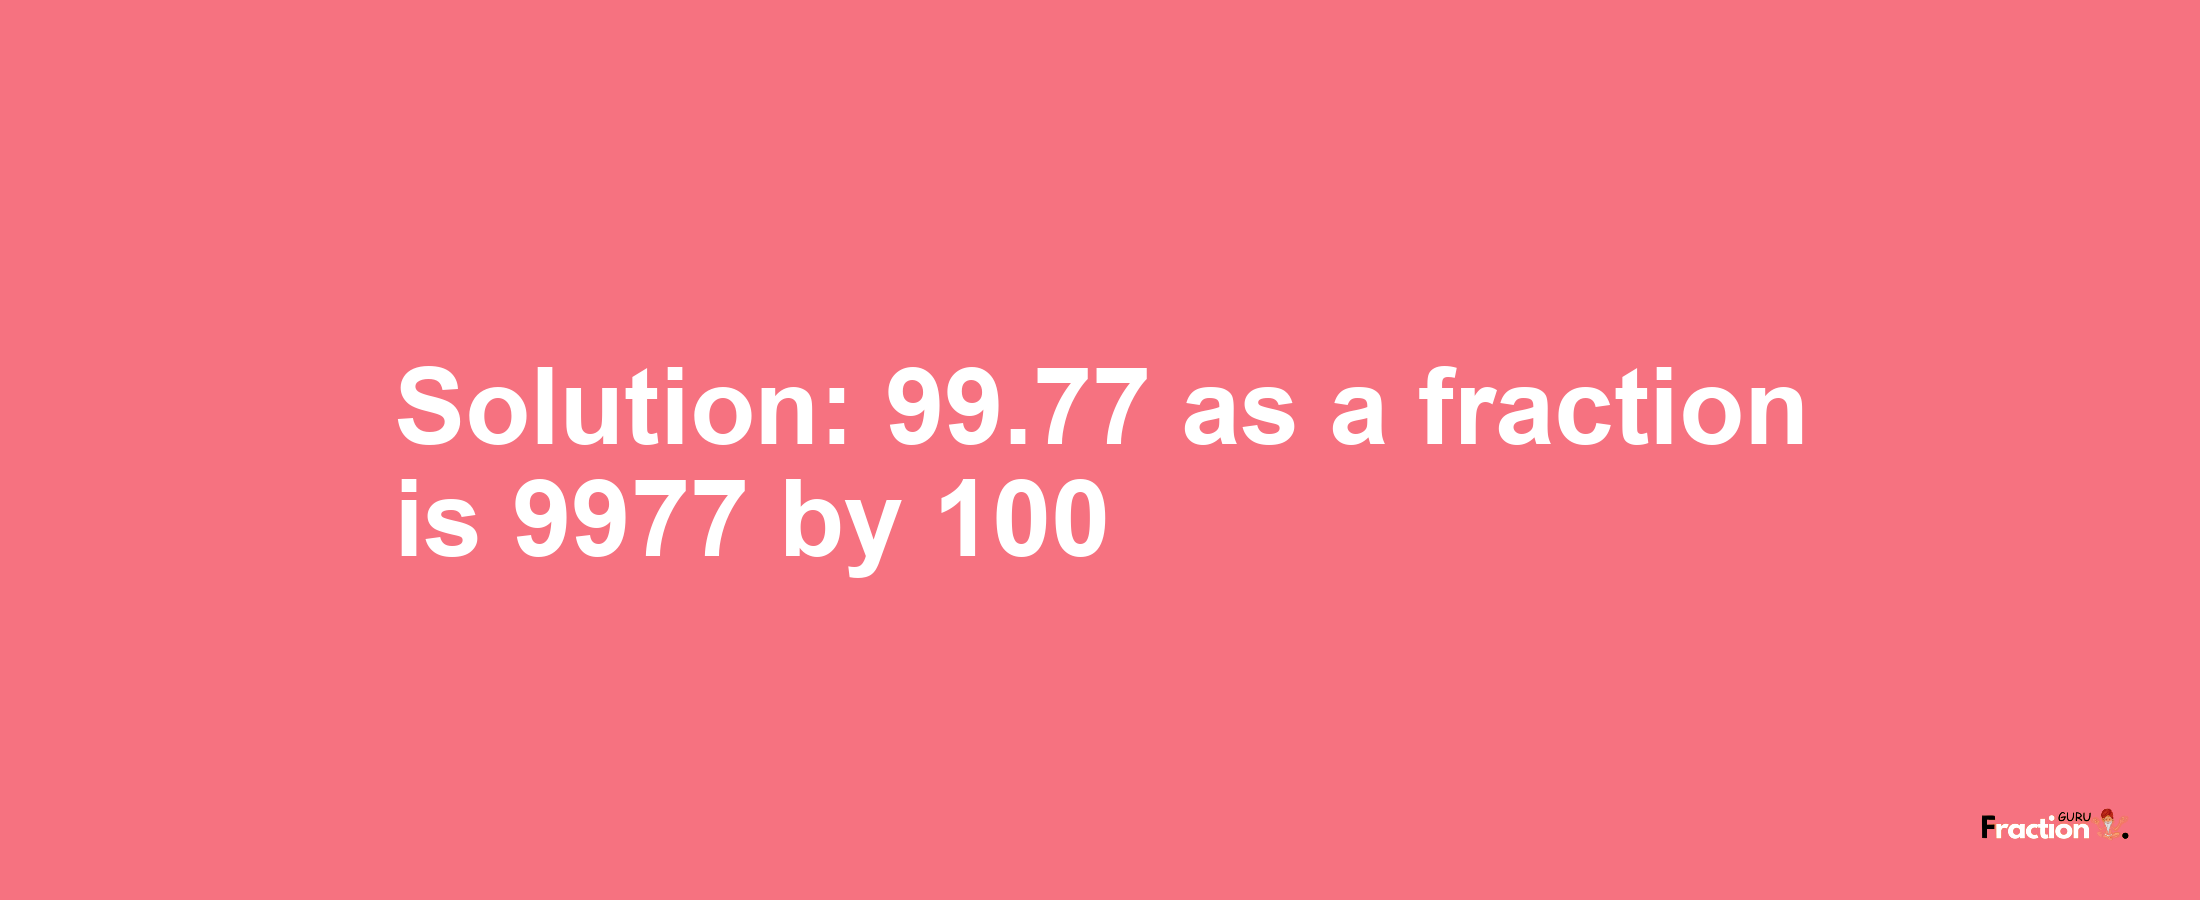 Solution:99.77 as a fraction is 9977/100